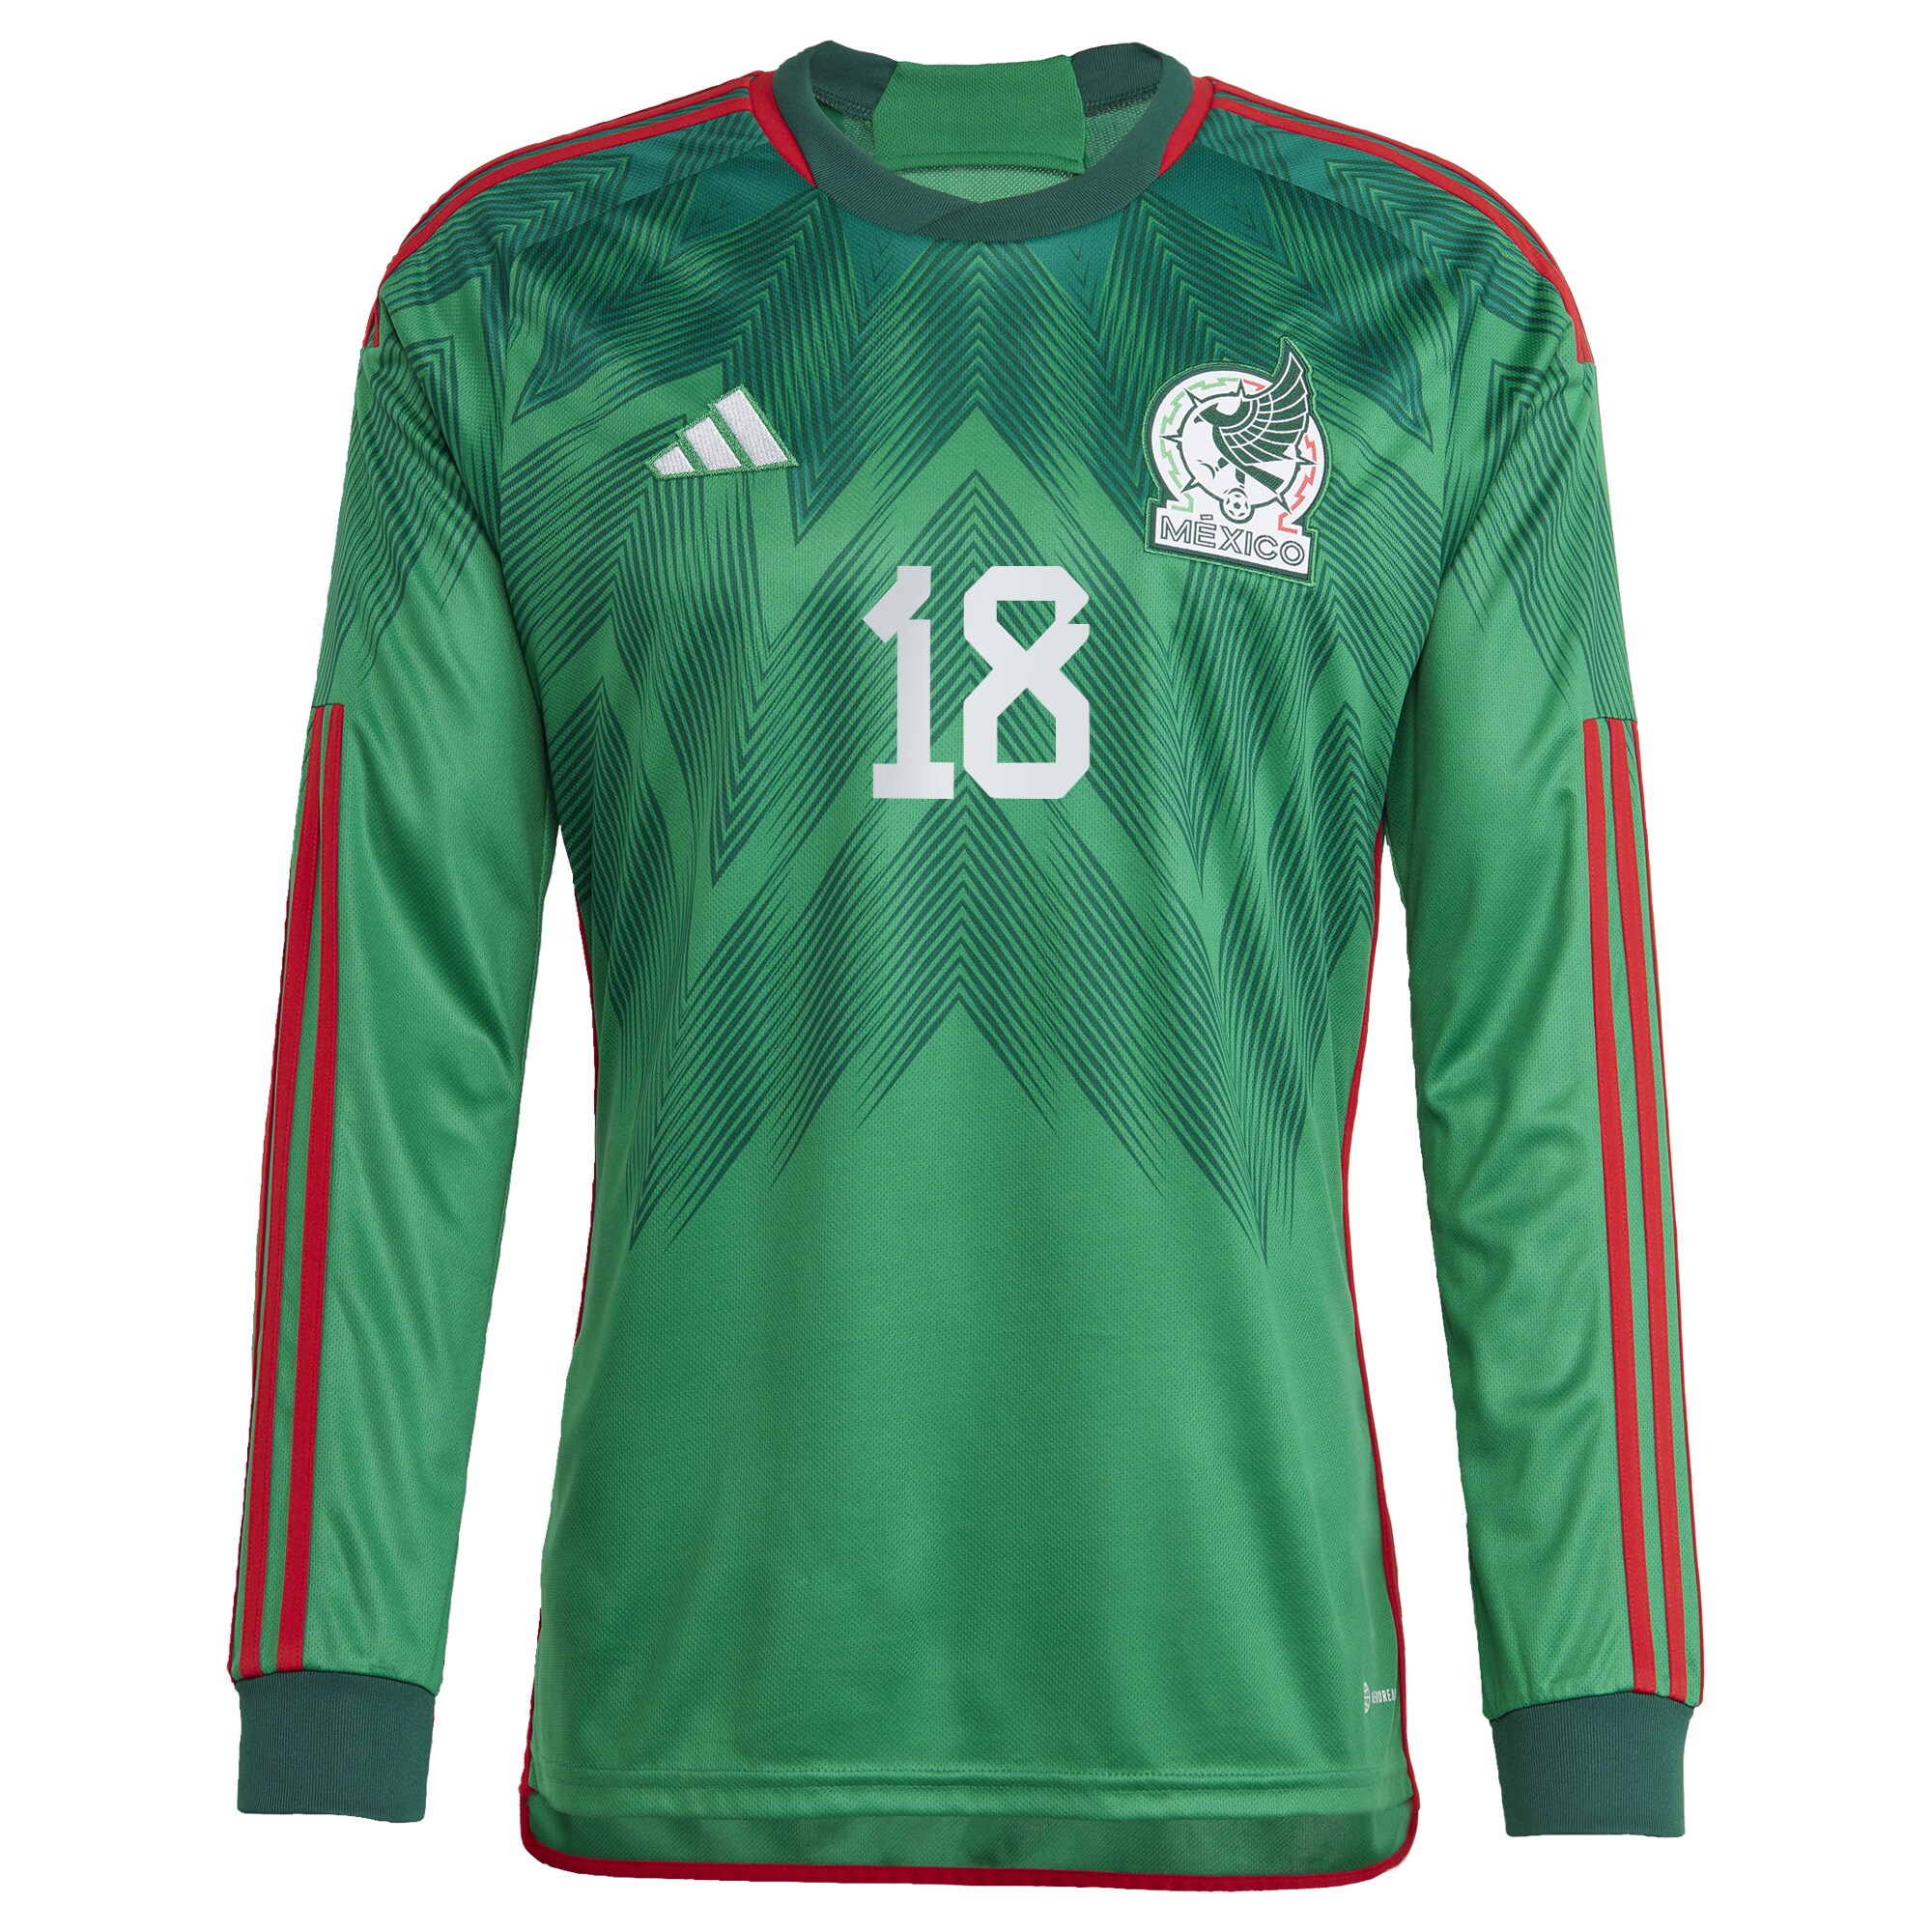 Andres Guardado Mexico National Team 2022/23 Home Long Sleeve Jersey